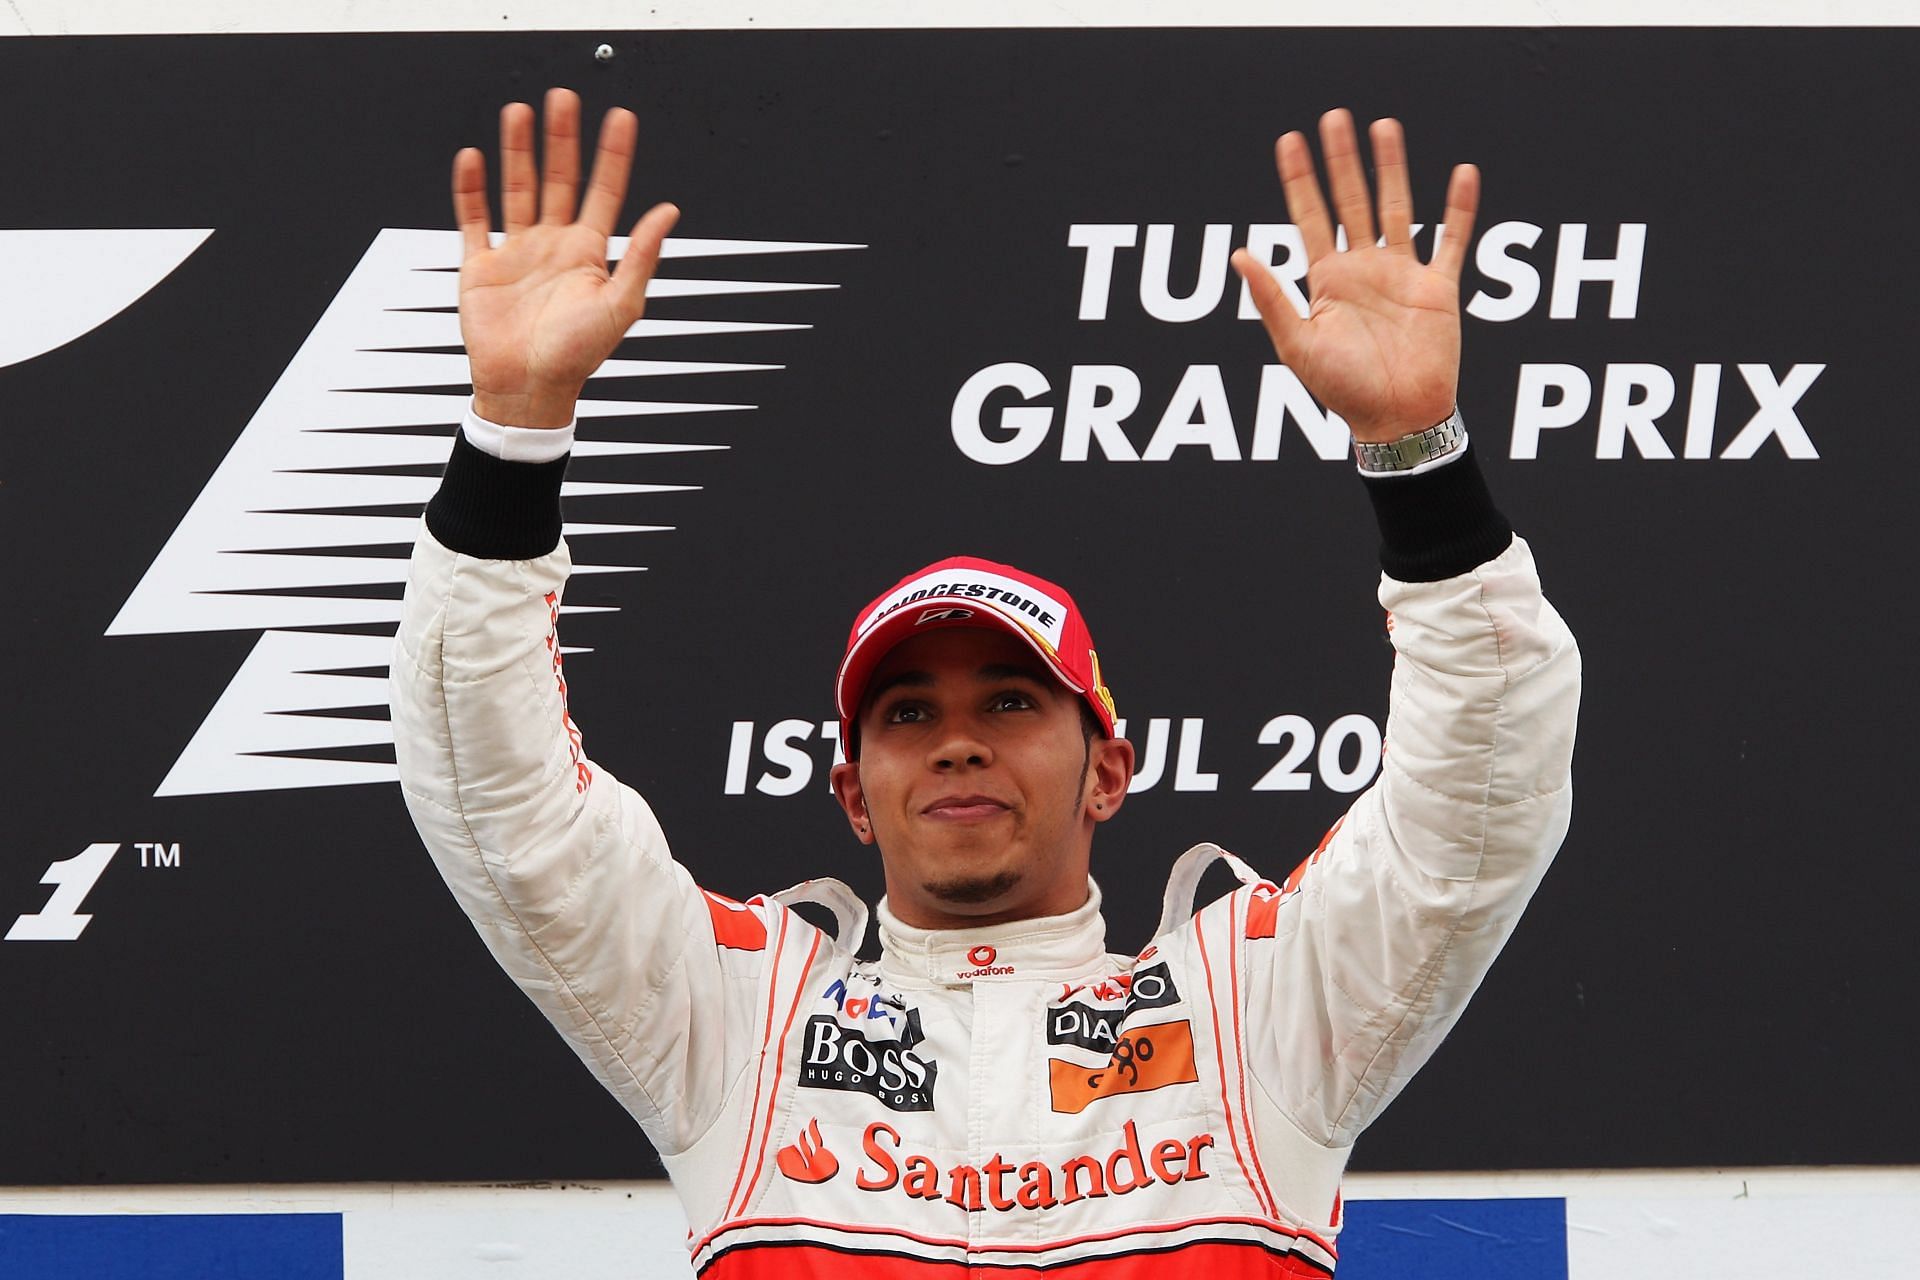 Lewis Hamilton celebrates on the podium after winning the Turkish Formula One Grand Prix for McLaren Mercedes on May 30, 2010 (Photo by Mark Thompson/Getty Images)